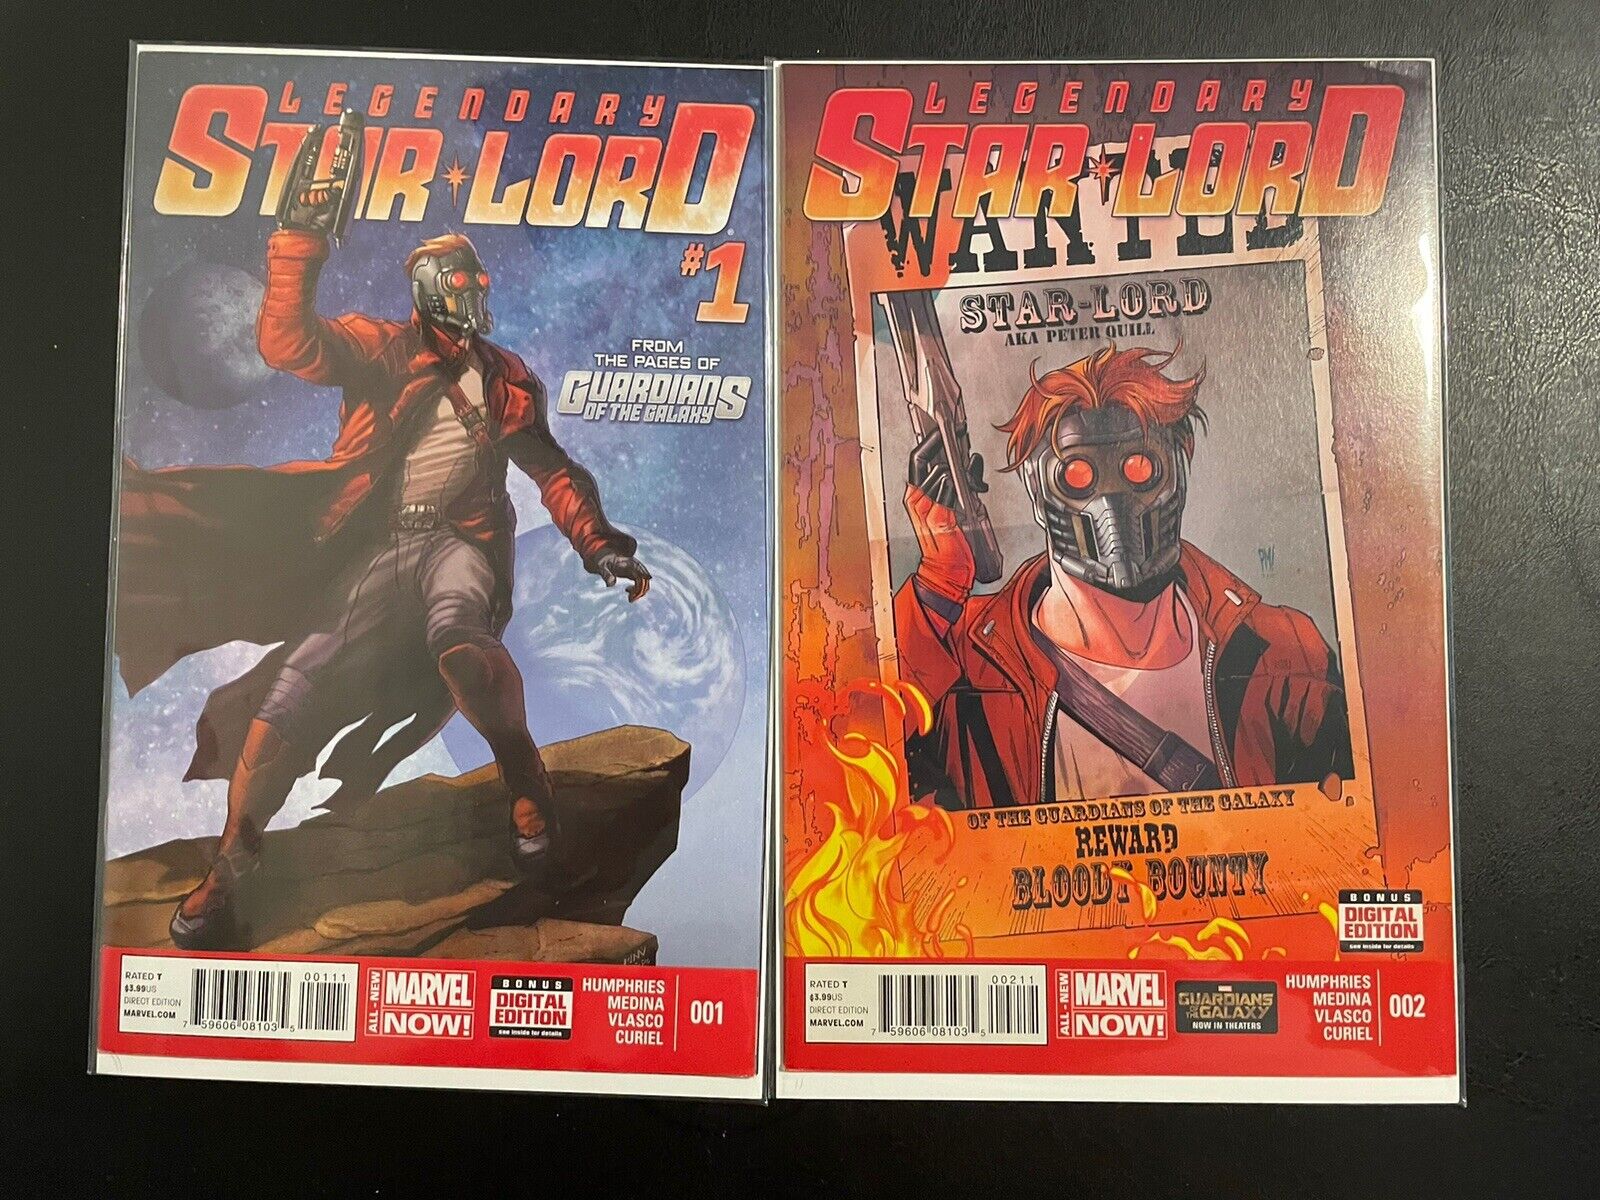 LEGENDARY STAR-LORD #1 And #2 1st print  - MARVEL 2014